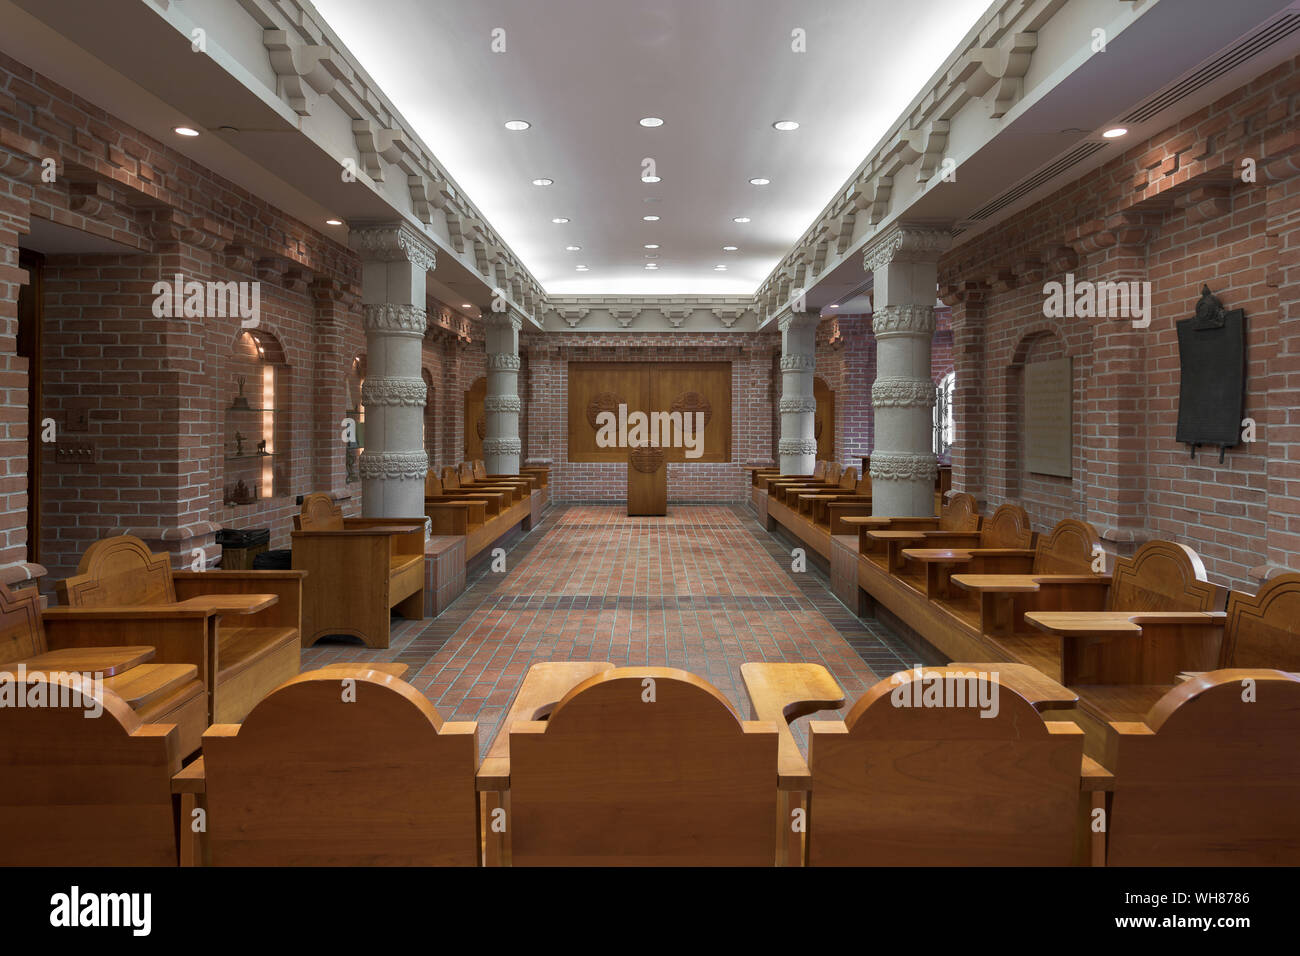 Indian Room in the Cathedral of Learning on the campus of the University of Pittsburgh in Pittsburgh, Pennsylvania Stock Photo